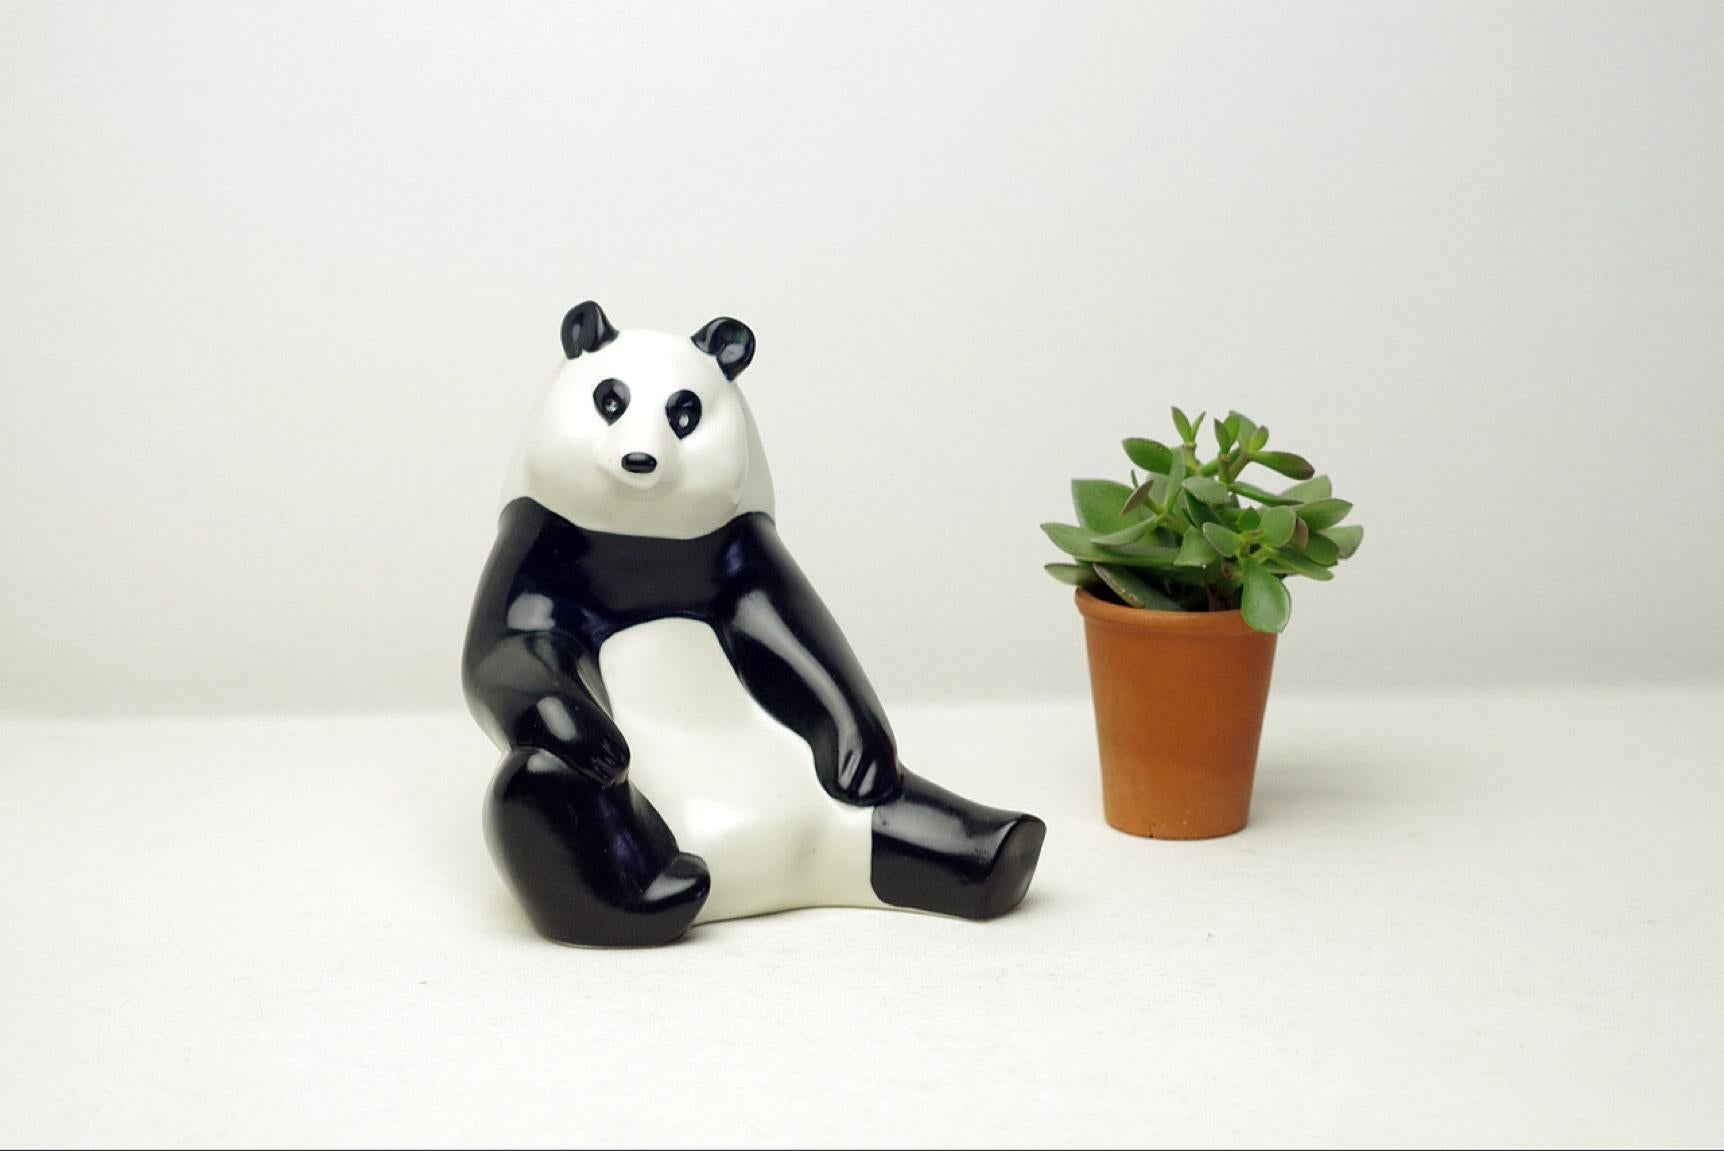 Product Description: 
This panda designed by Lillemor Mannerheim was made for WWF and part of the sales of the items was donated to this organisation. Mannerheim, being a member of the Finnish upper-class, worked for Rörstrand, Gefle as well as for